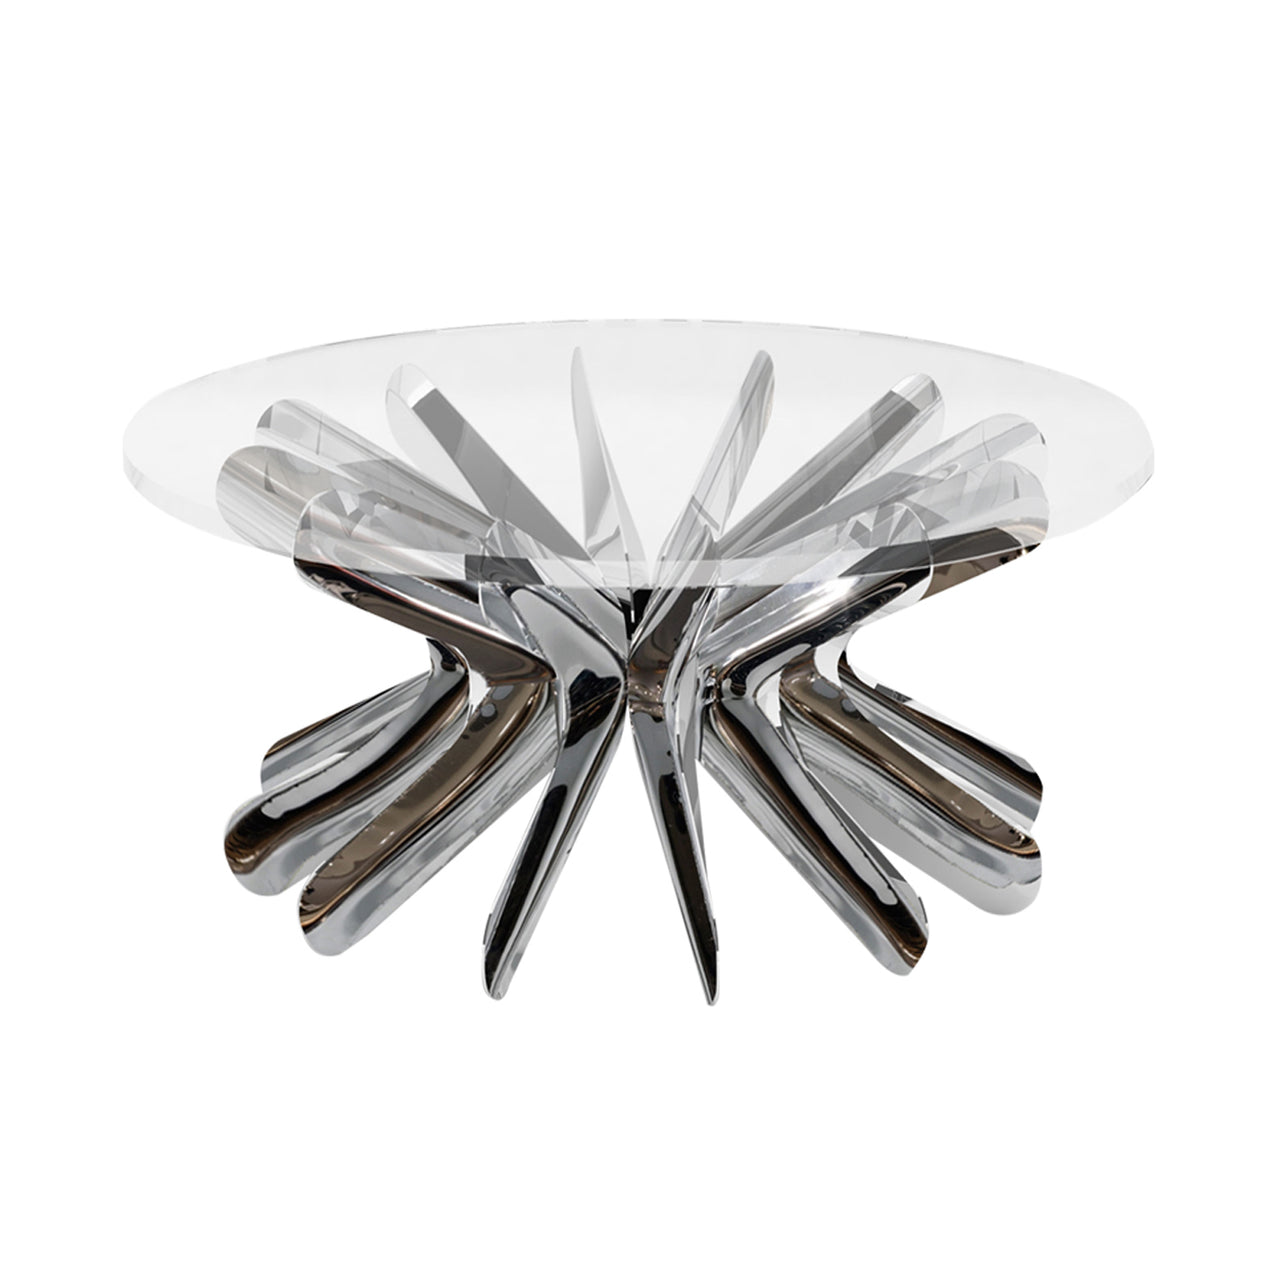 Steel in Rotation Coffee Table: Inox Polished Stainless Steel + Large